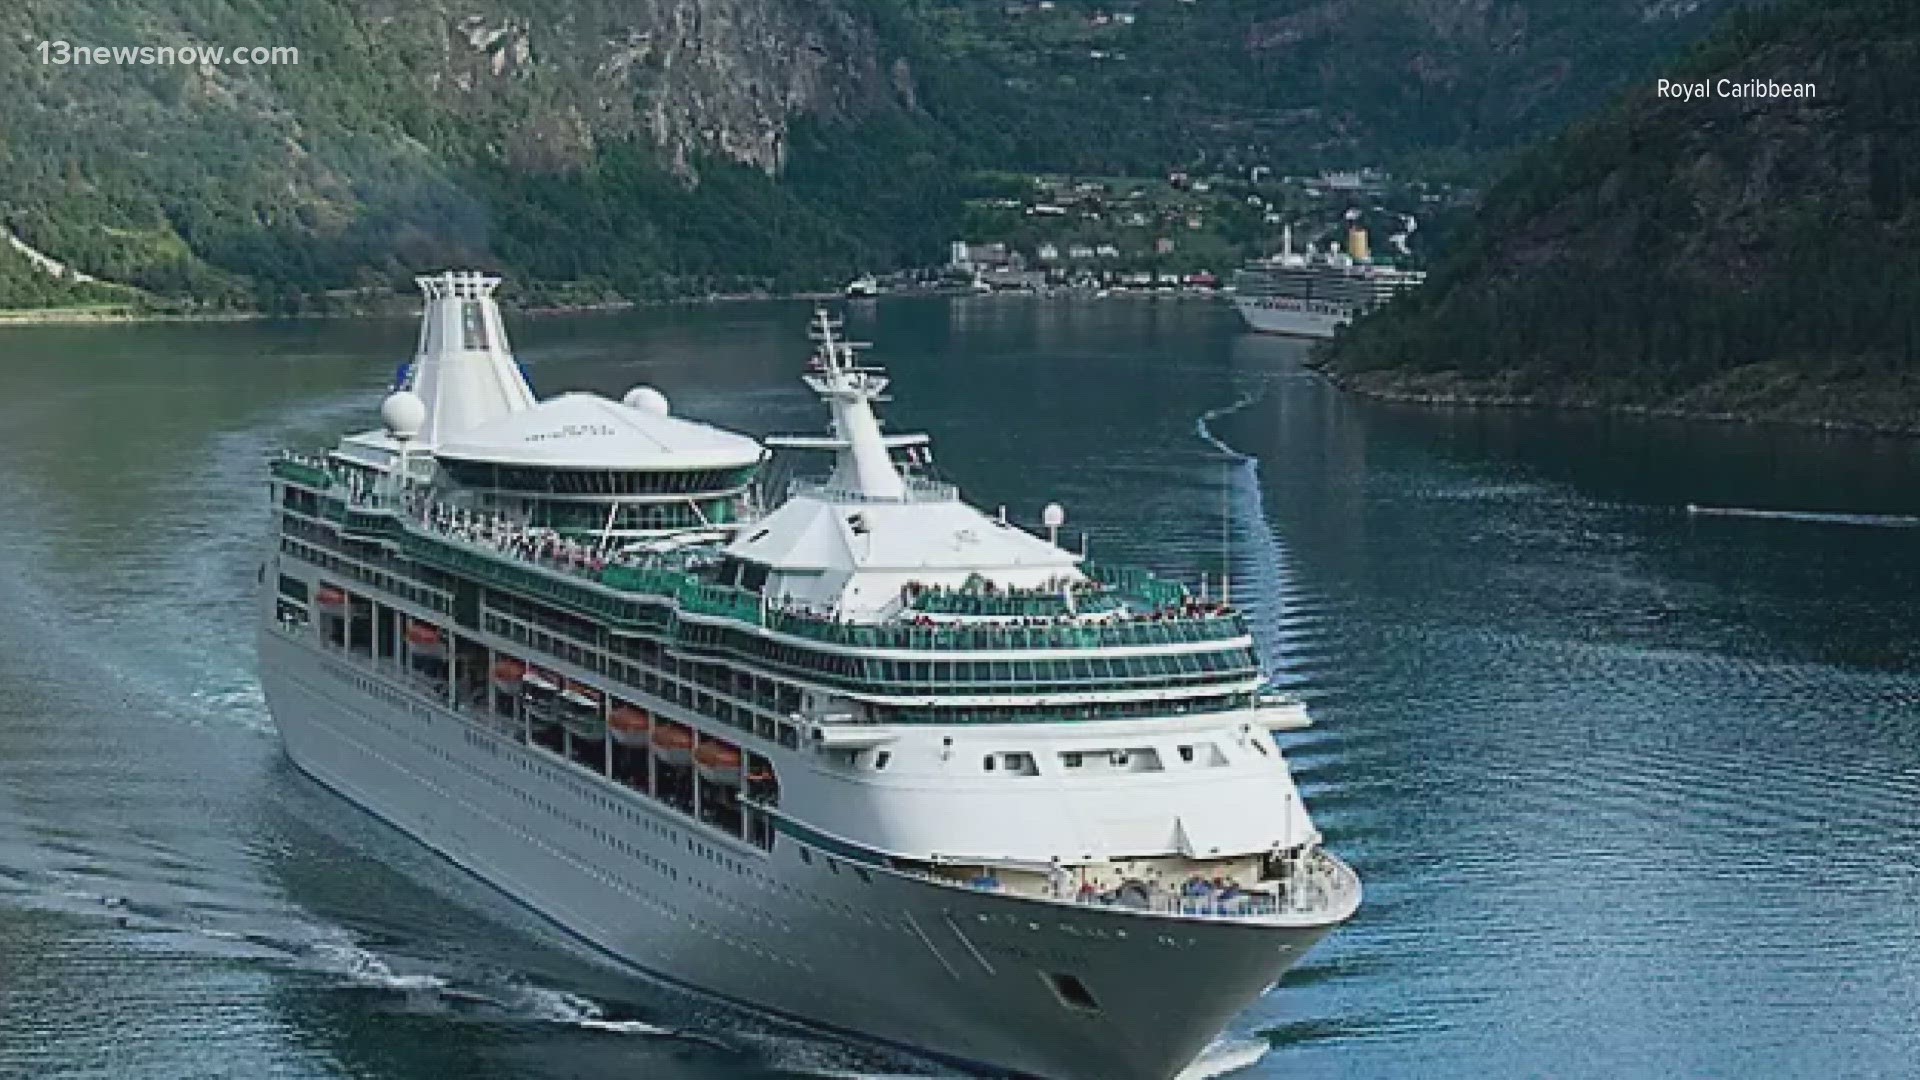 Now, not one but two cruise lines are relocating their Baltimore-based ships to Norfolk.